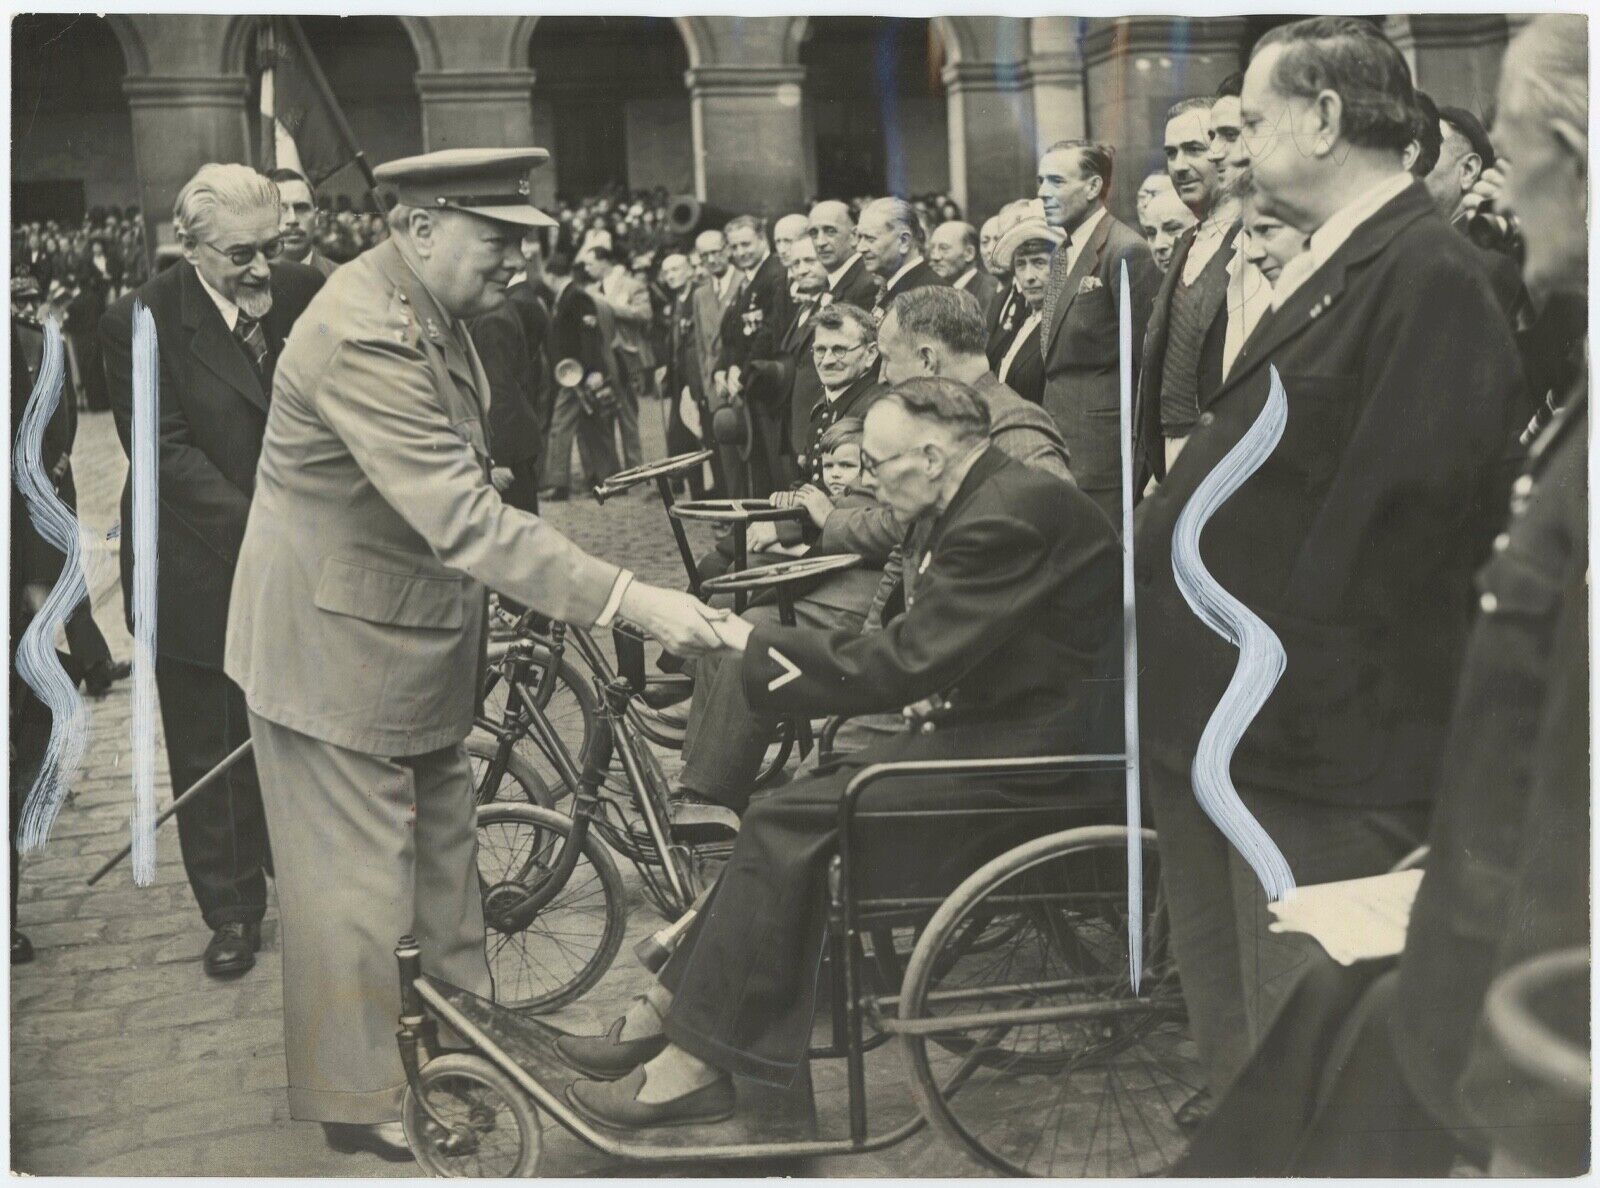 10 May 1947 press photo of Churchill meeting war-wounded veterans in Paris